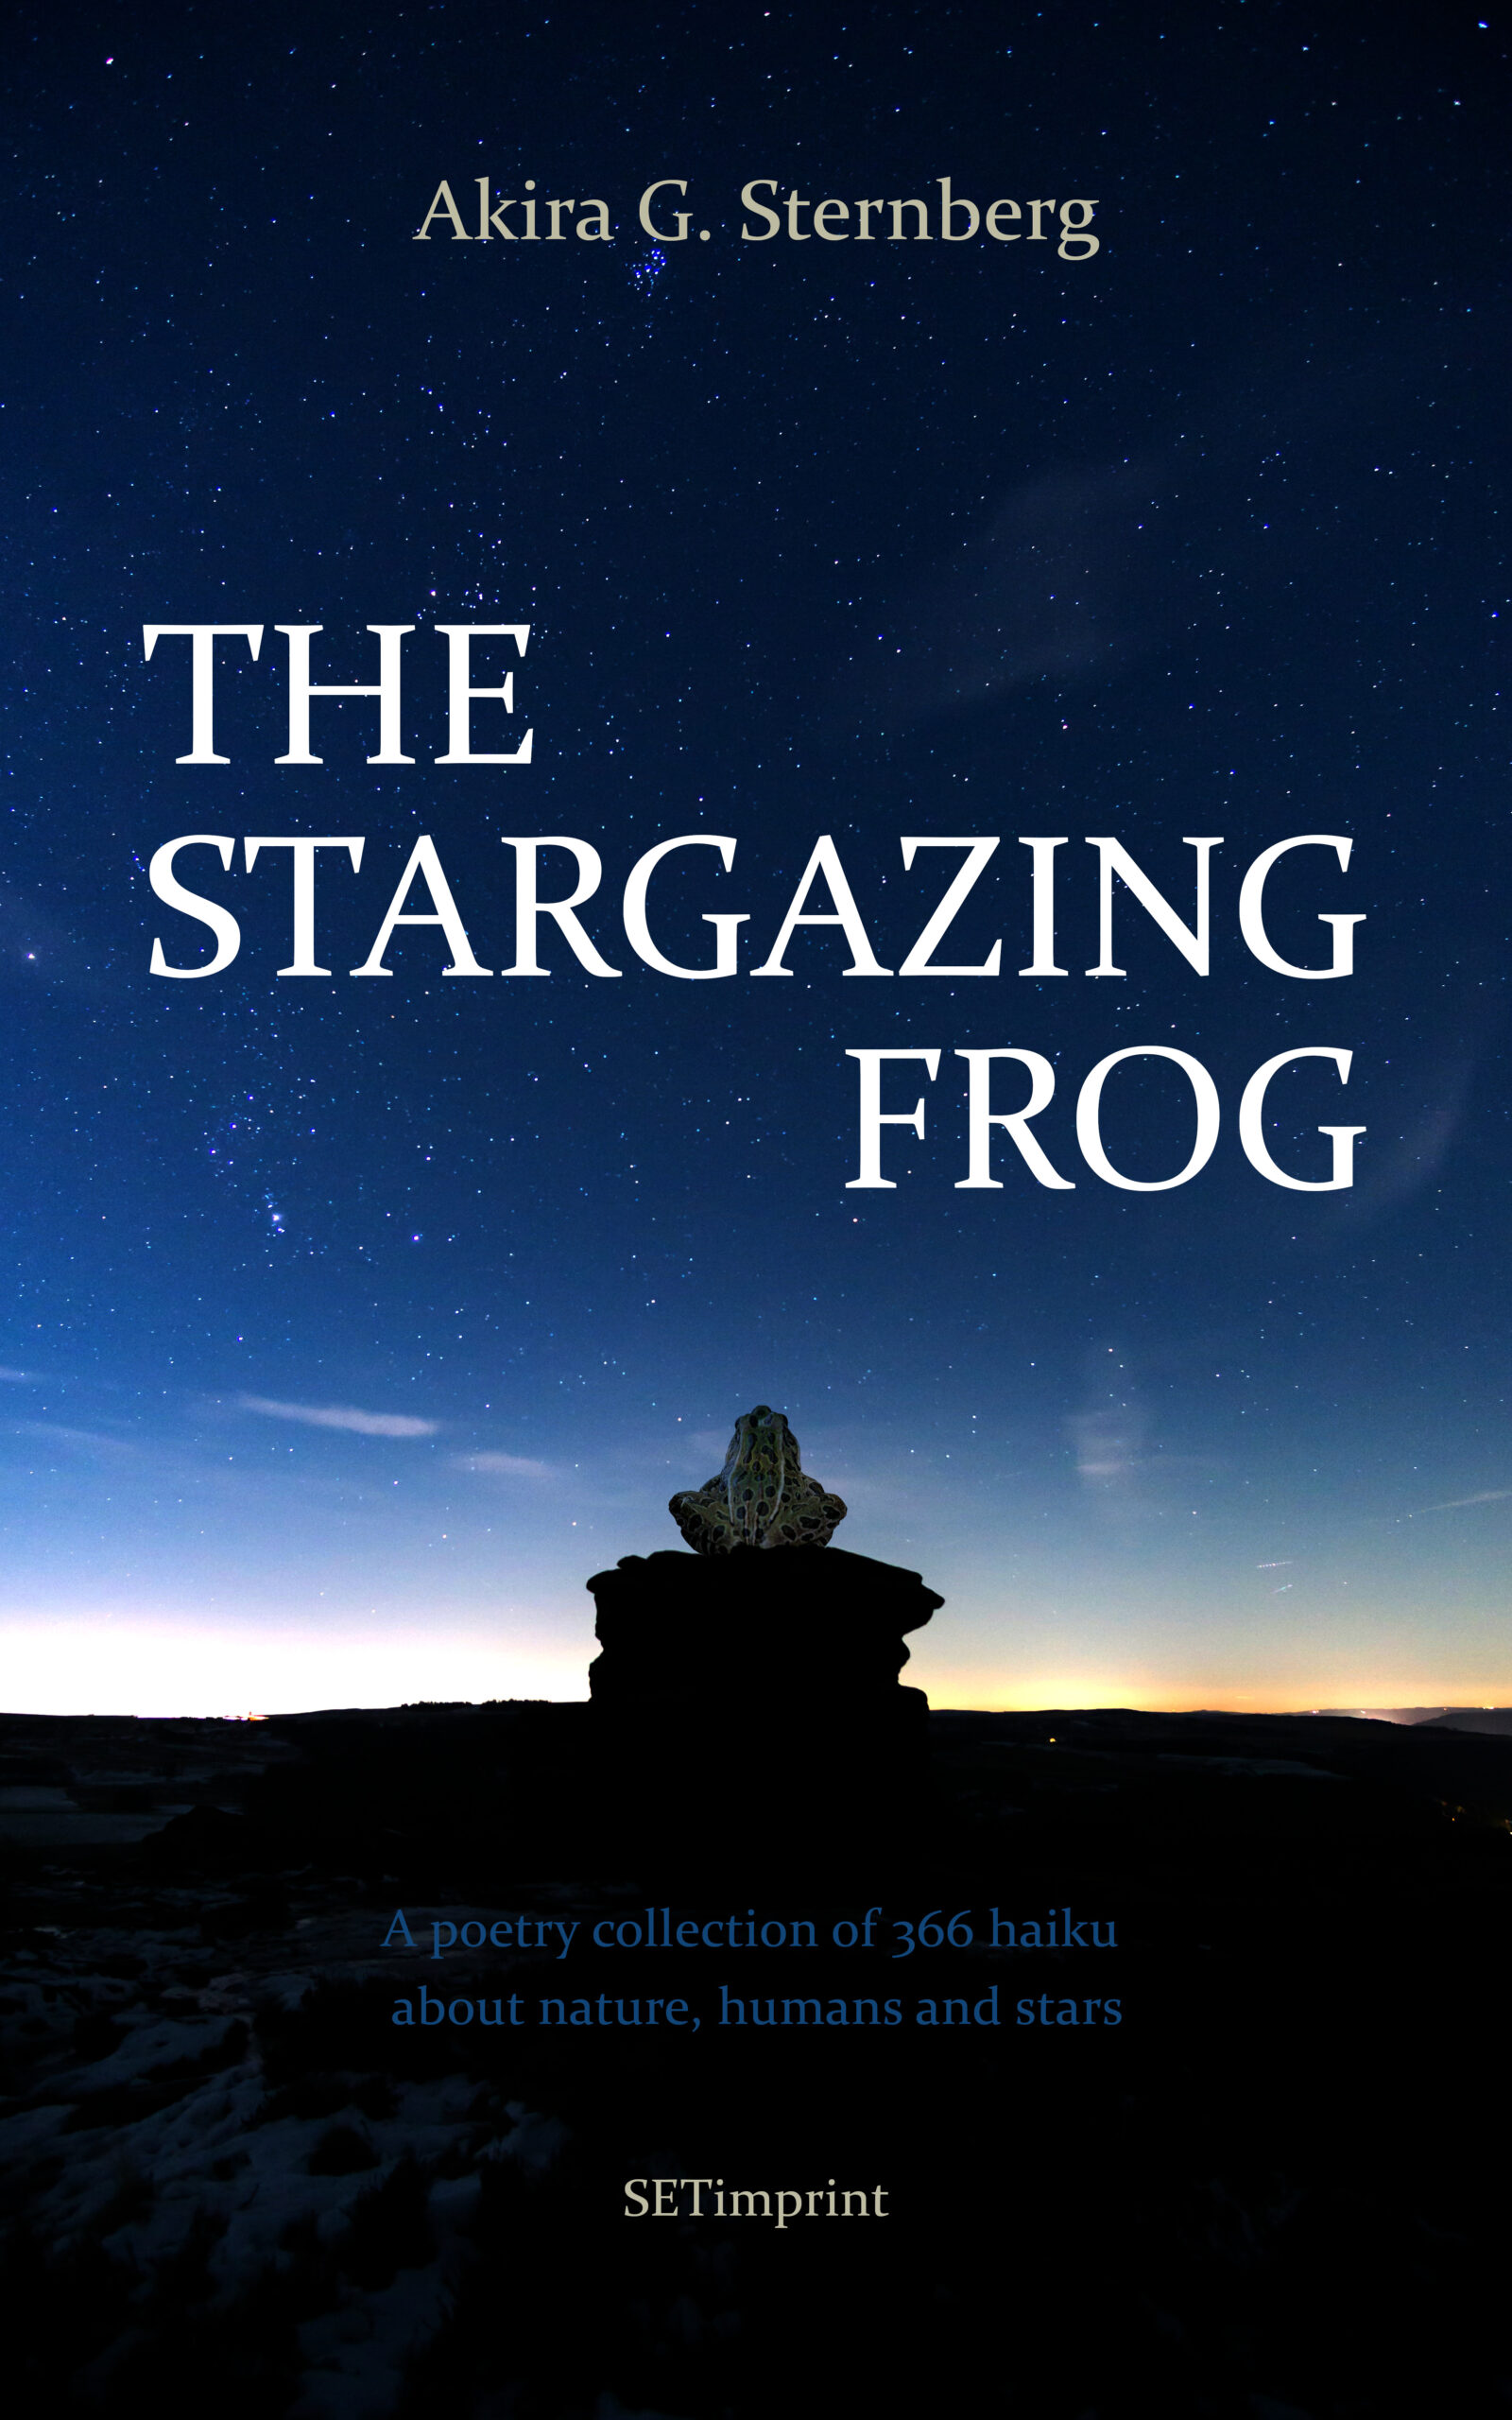 FREE: The Stargazing Frog: A poetry collection of 366 original haiku about nature, humans and stars by Akira Sternberg